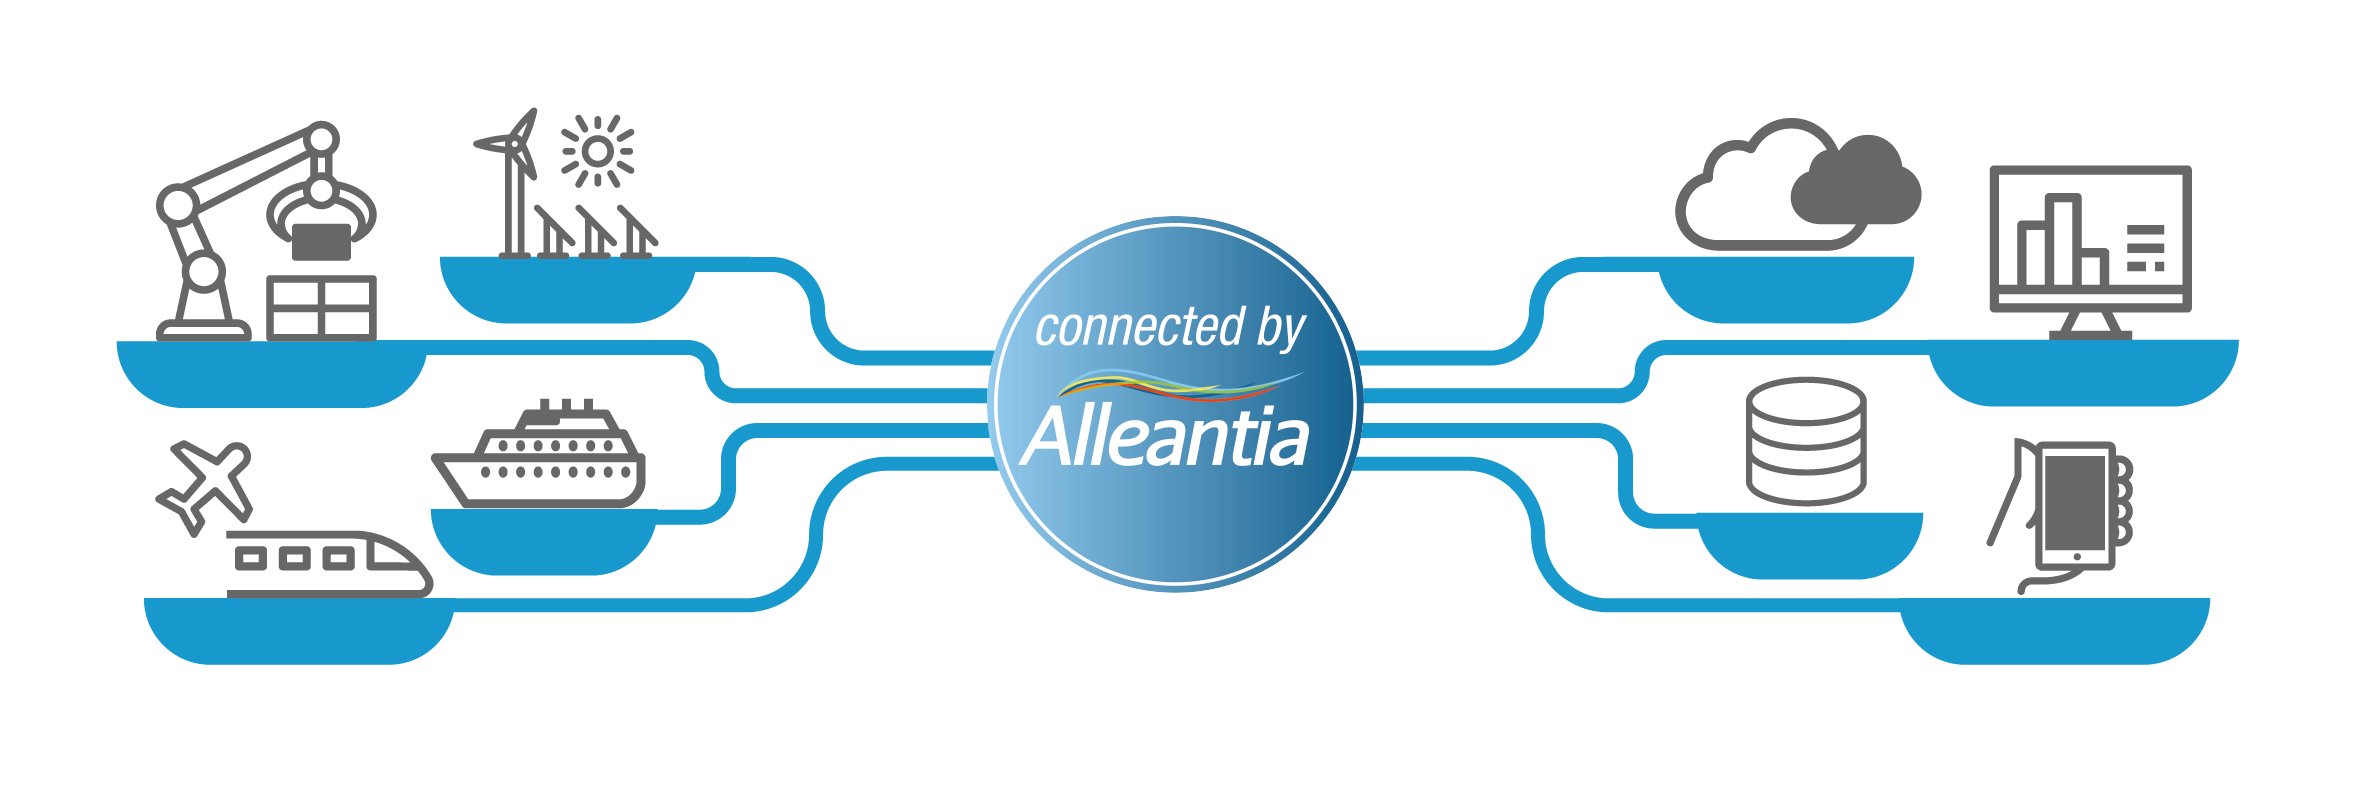 alleantia_connect_new